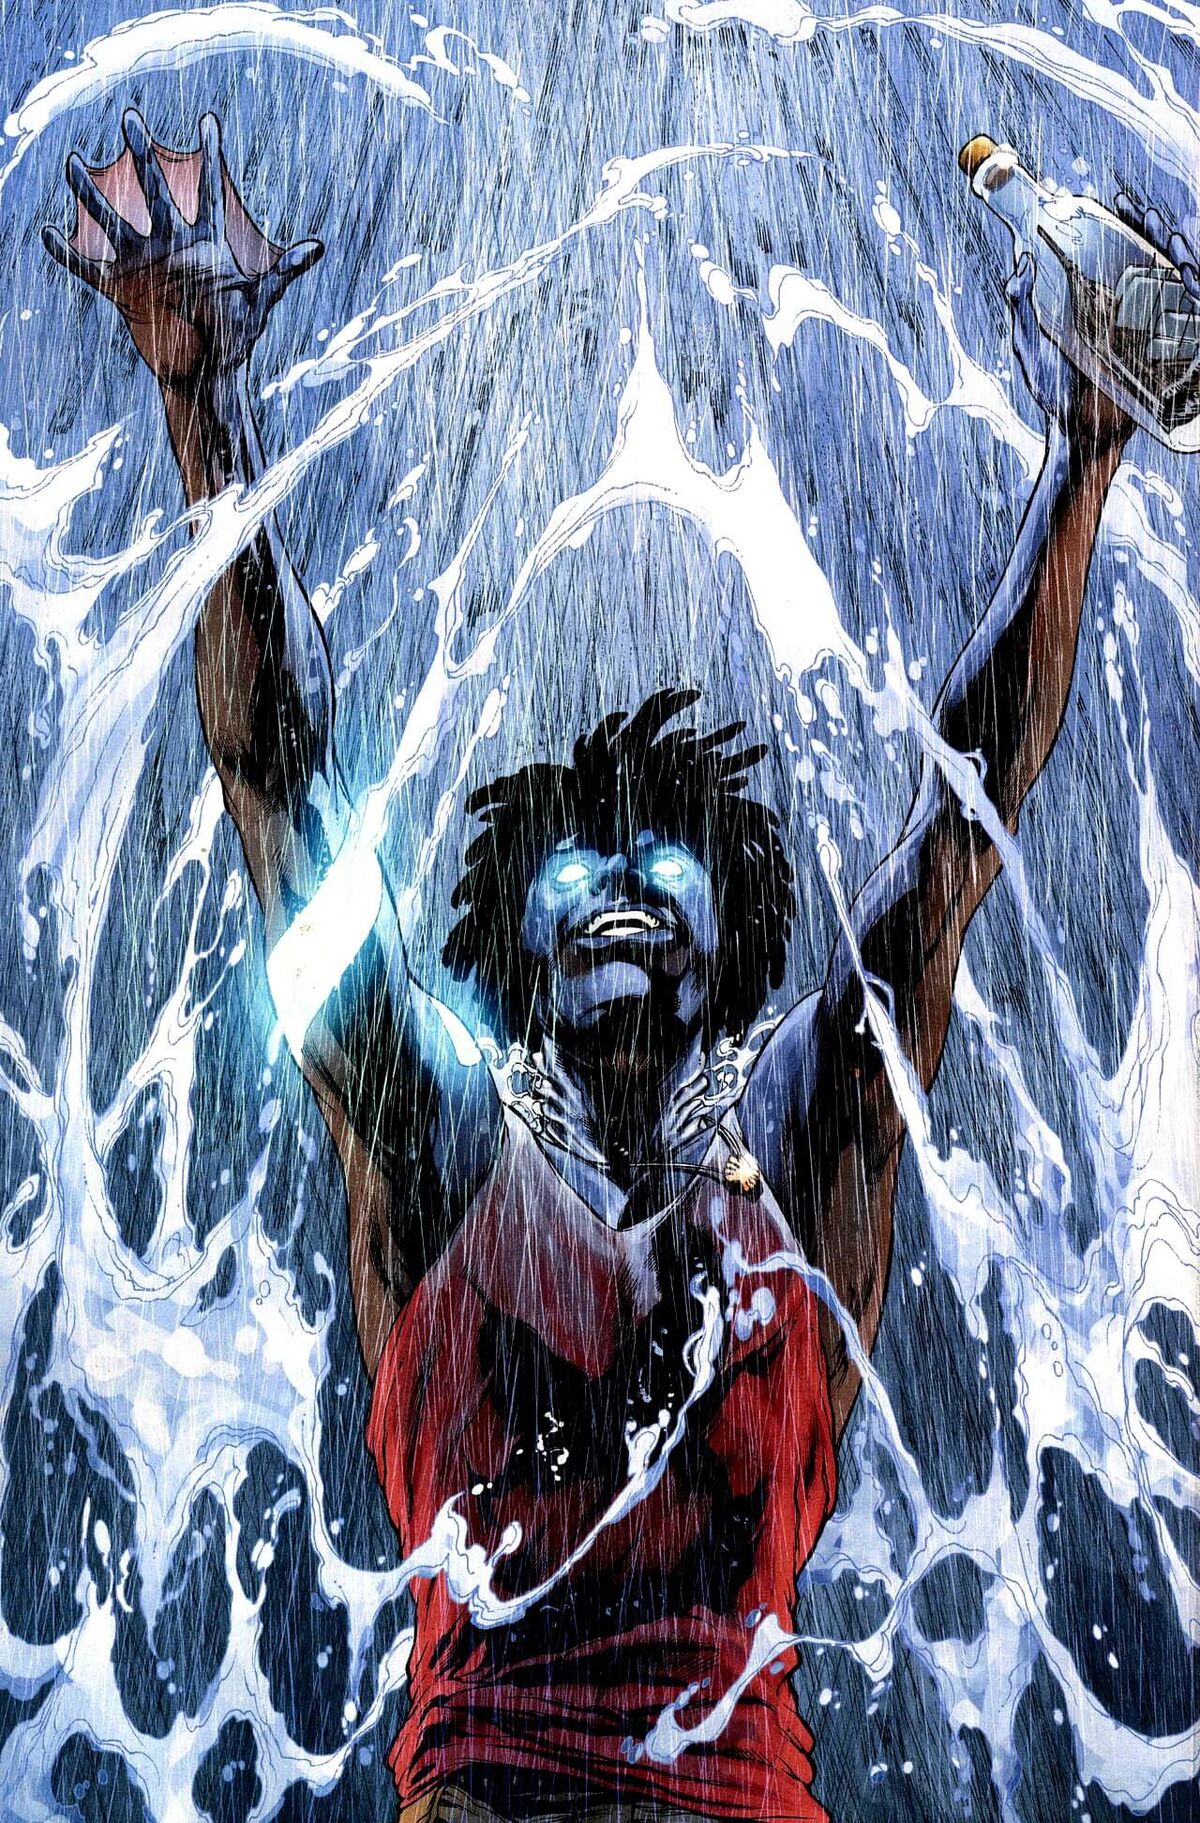 Aqualad Jackson Hyde splashed by water